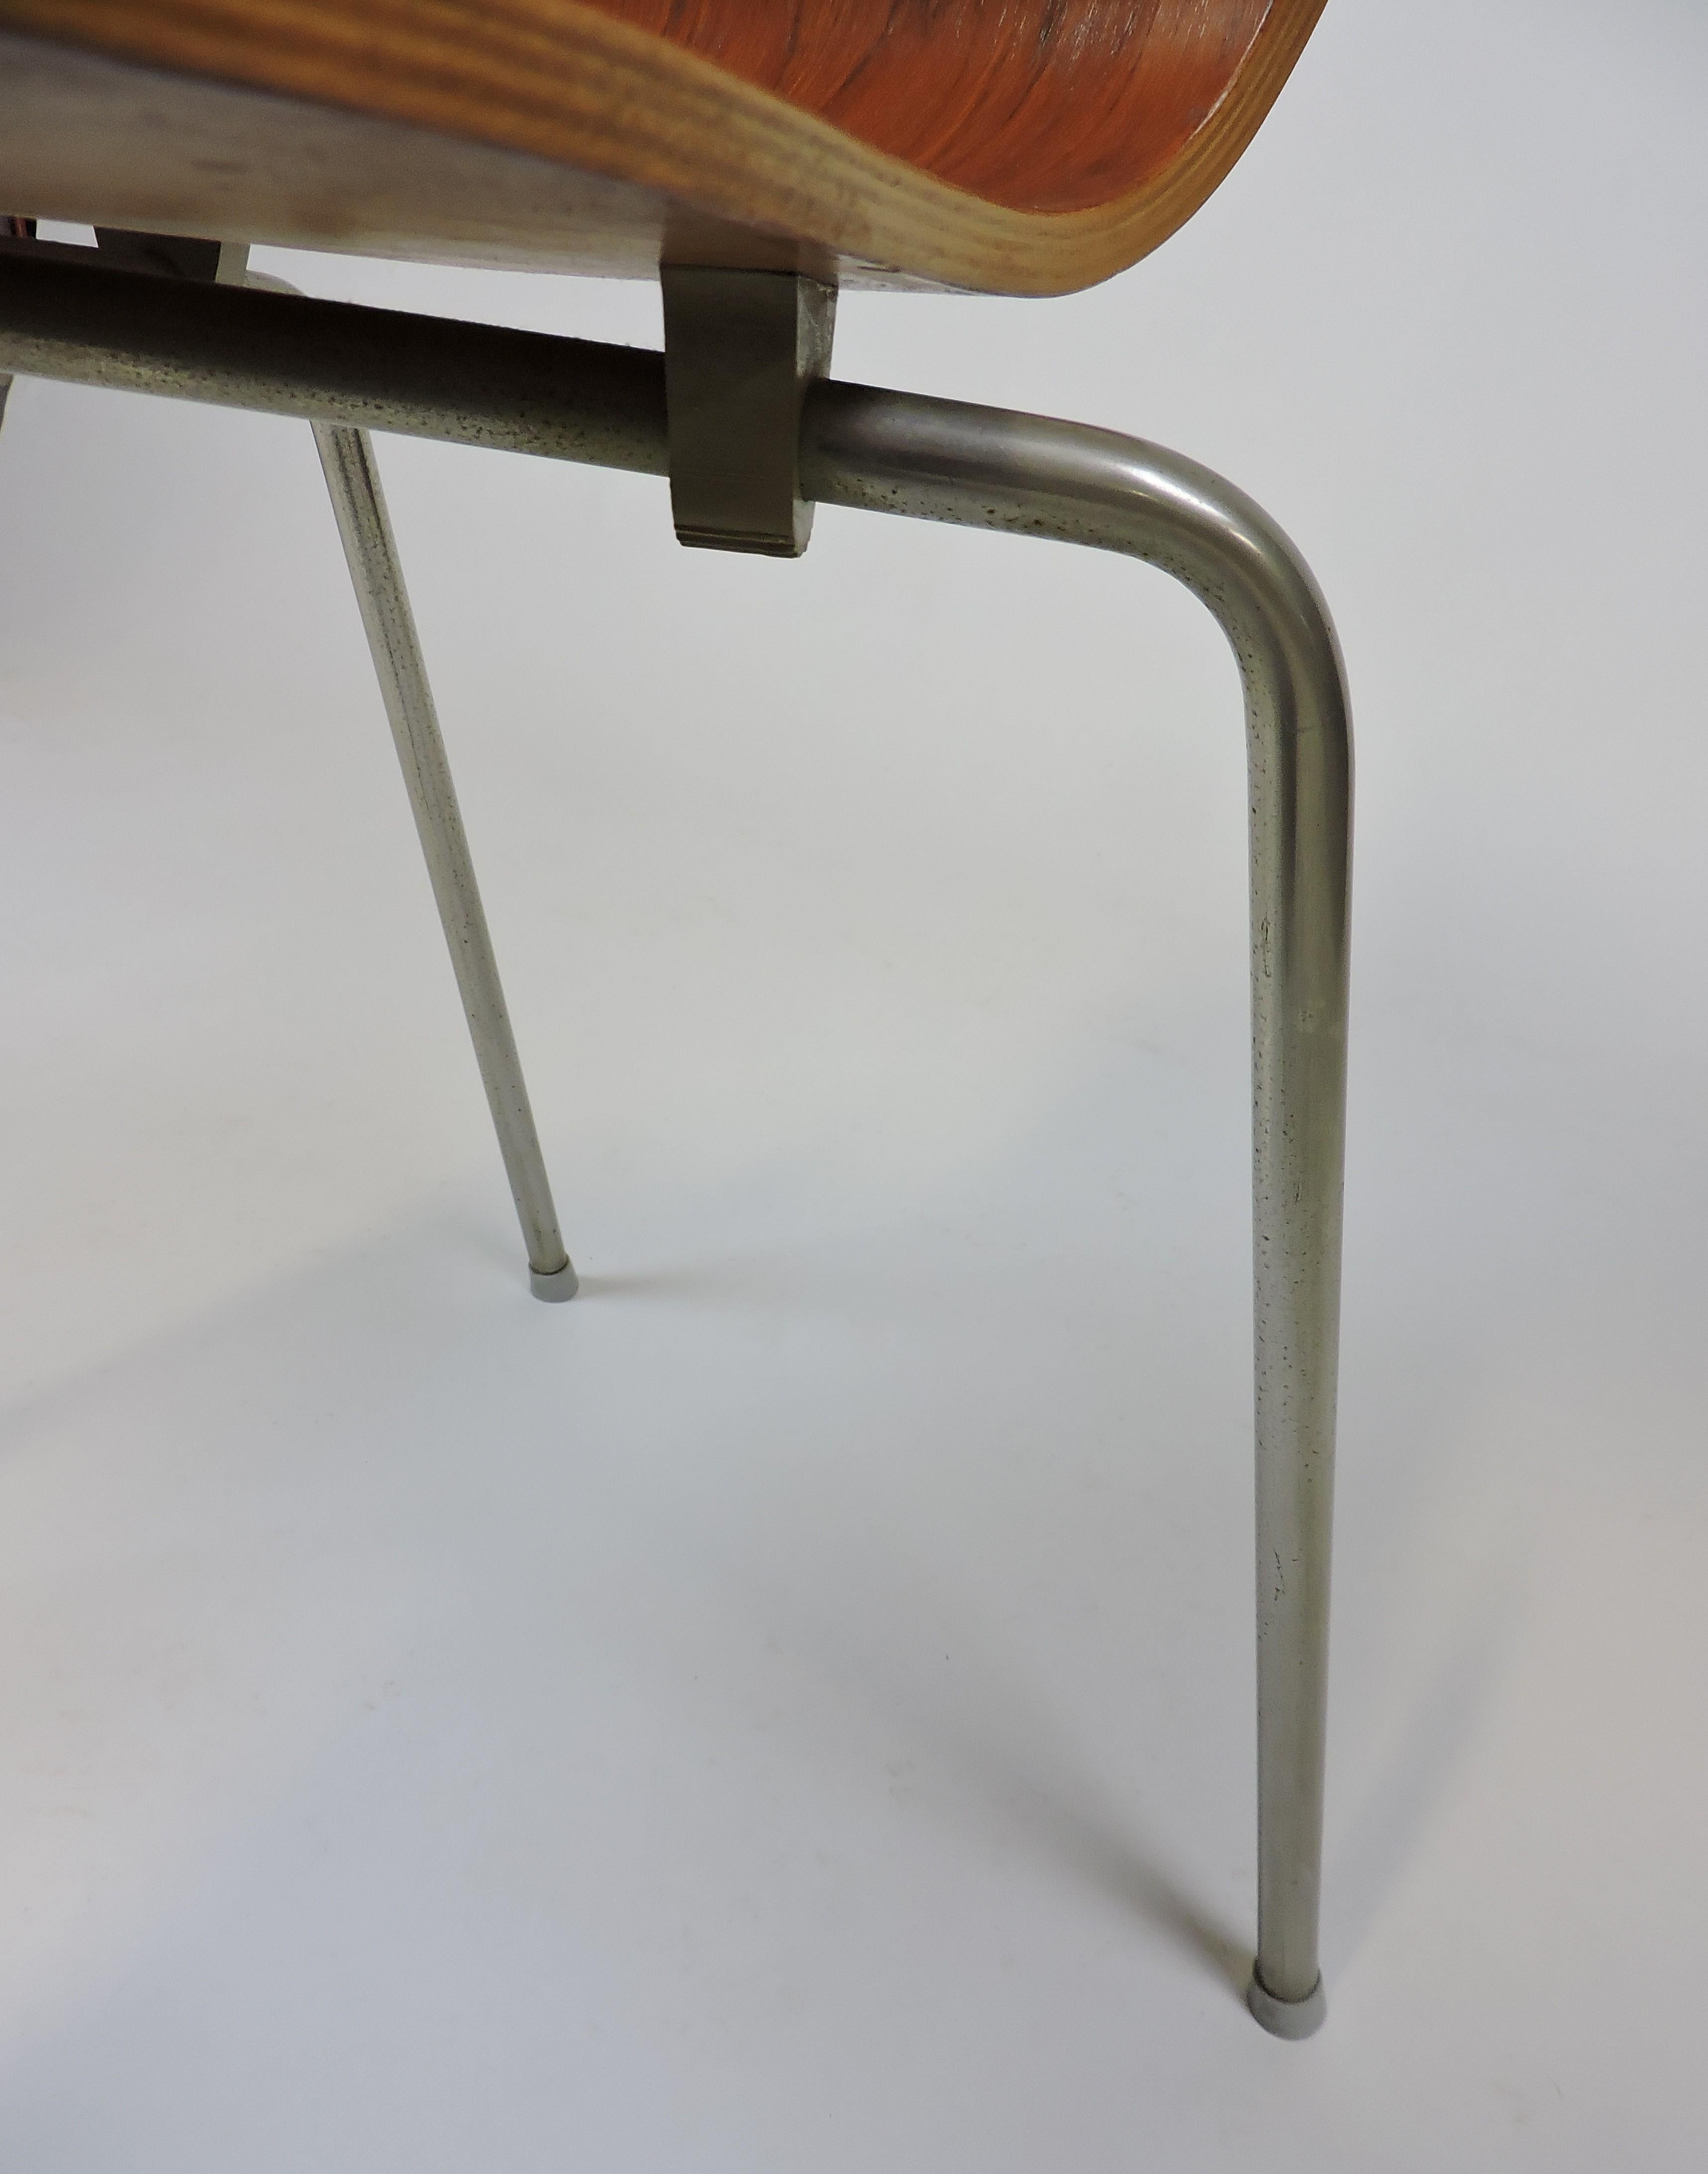 Midcentury Danish Modern Bentwood Dining, Side or Desk Chair In Good Condition For Sale In Chesterfield, NJ